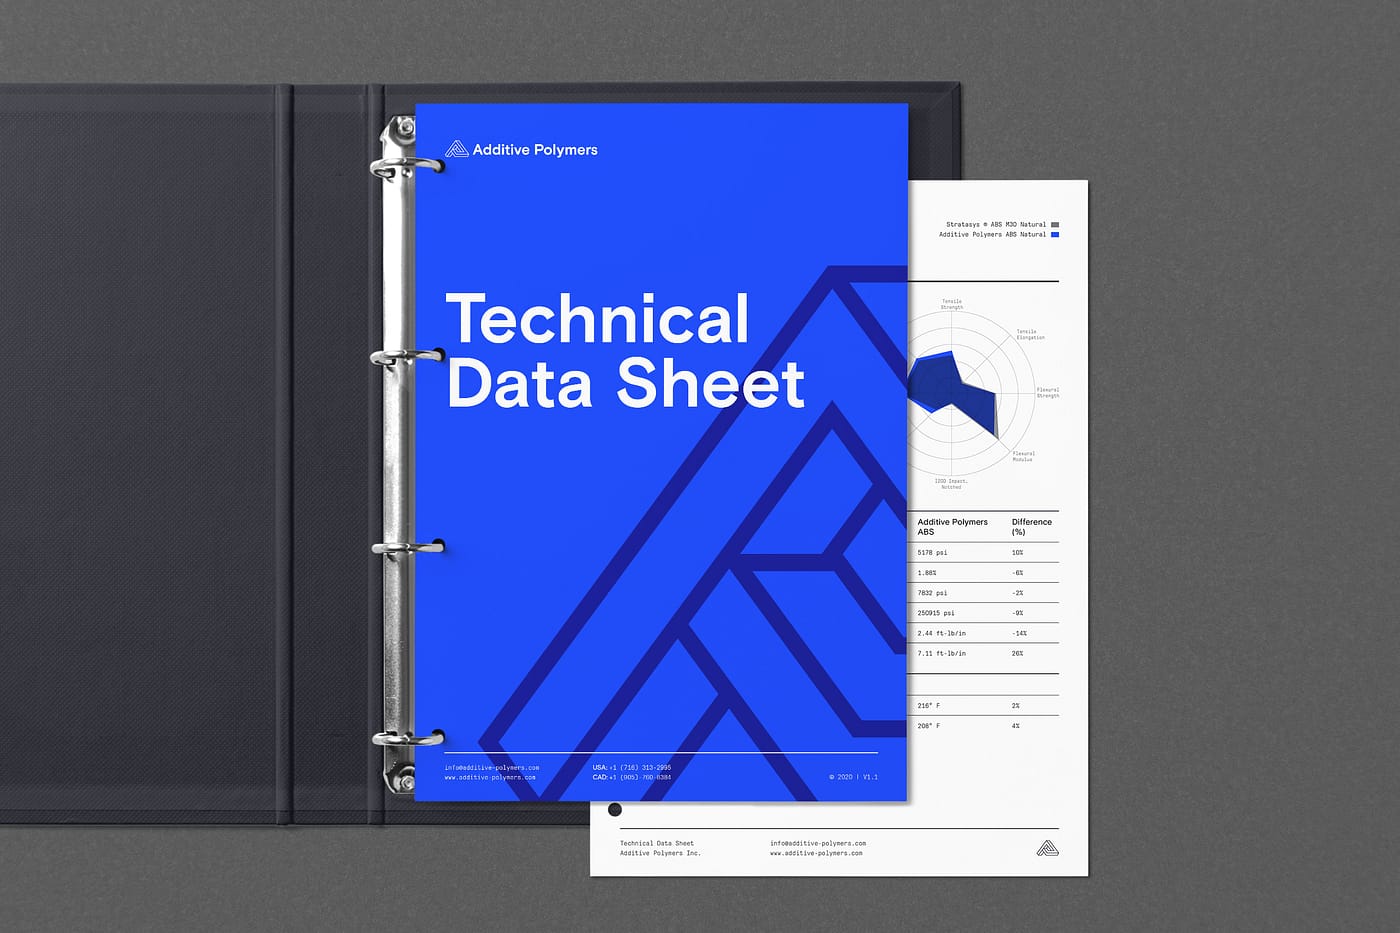 Blue and white binder includes a Technical Data Sheet for 3D printing